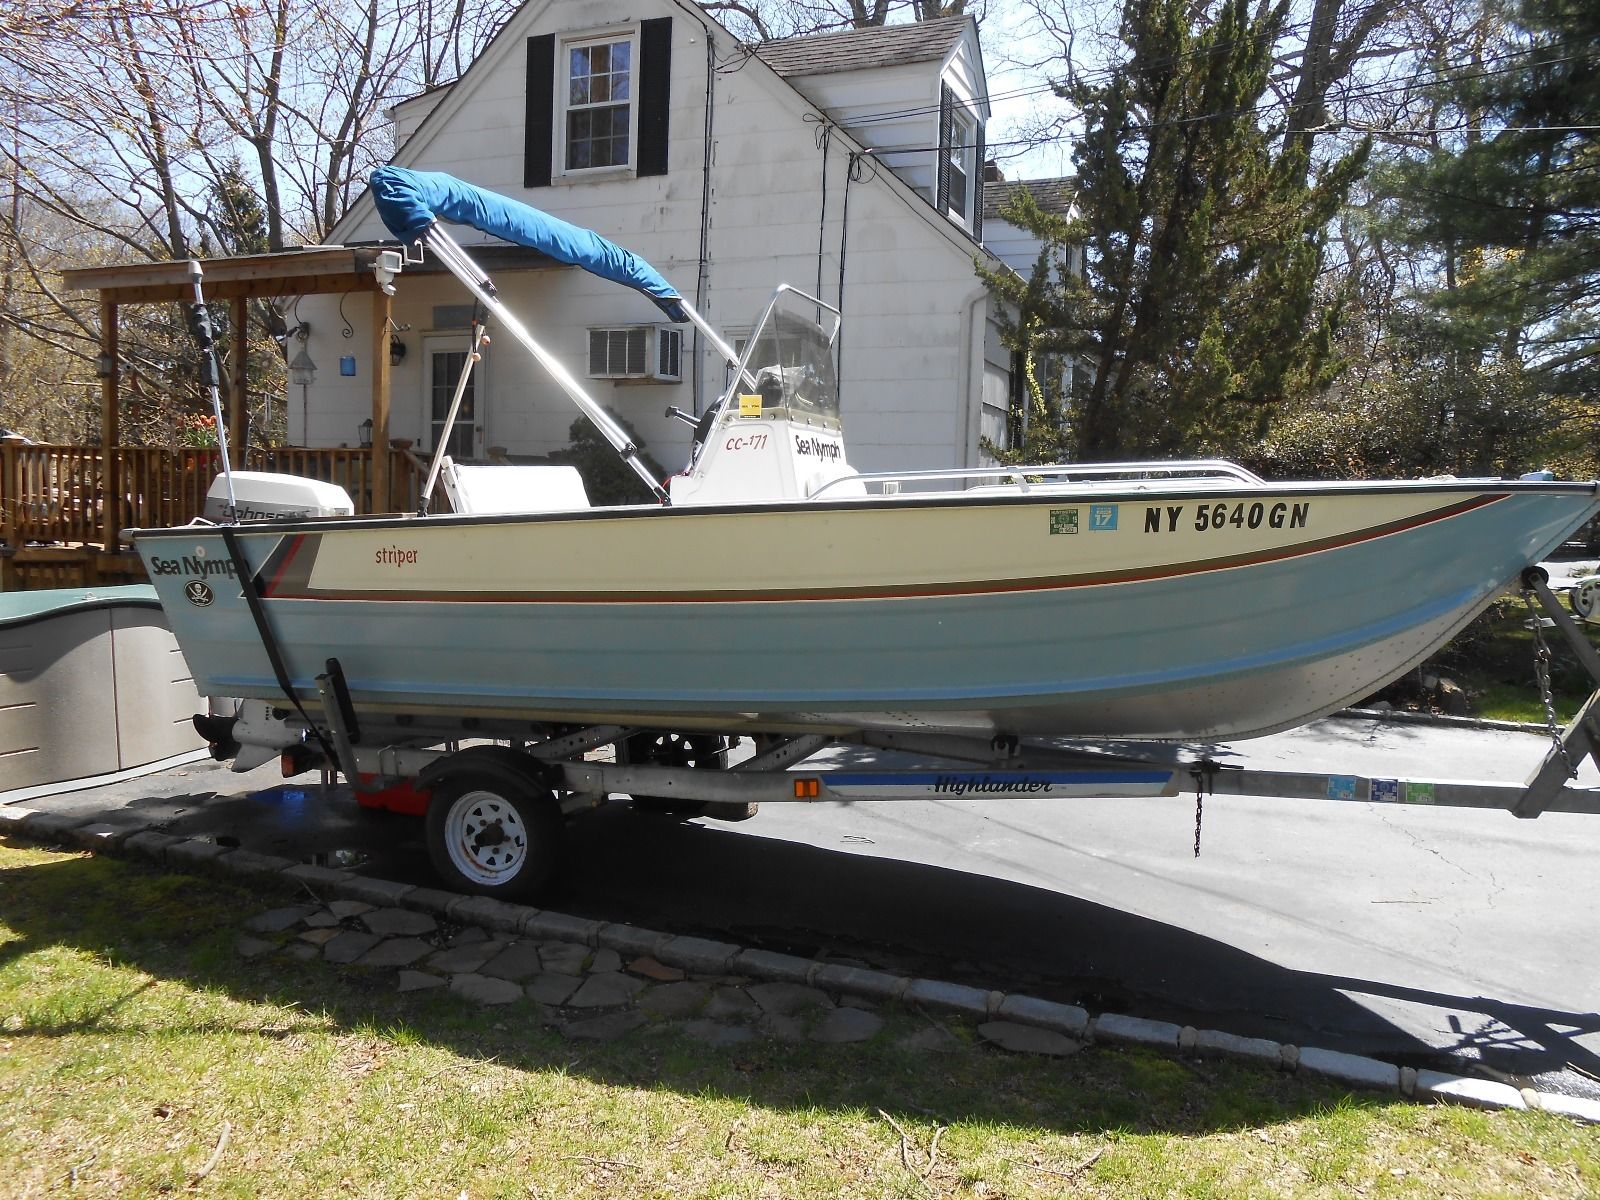 Sea Nymph CC171 1987 for sale for $2,950 - Boats-from-USA.com